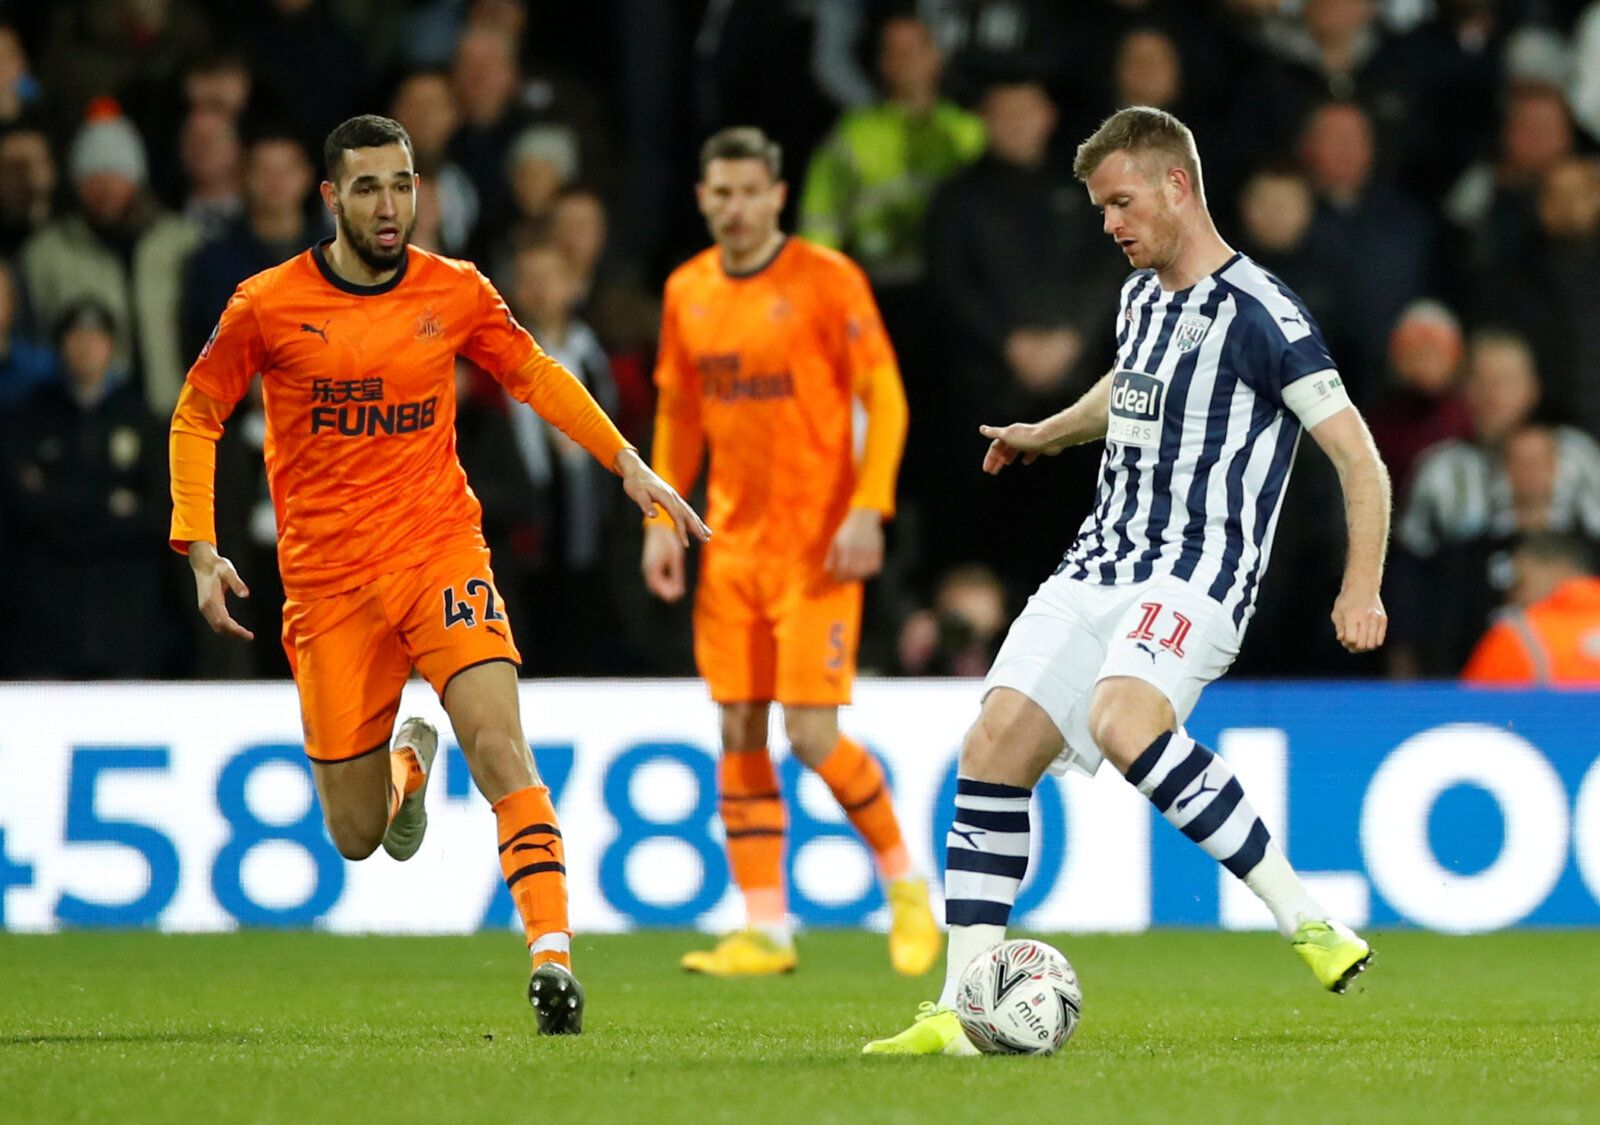 Soccer Football - FA Cup Fifth Round - West Bromwich Albion v Newcastle United - The Hawthorns, West Bromwich, Britain - March 3, 2020  Newcastle United's Nabil Bentaleb in action with West Bromwich Albion's Chris Brunt   Action Images via Reuters/Andrew Boyers